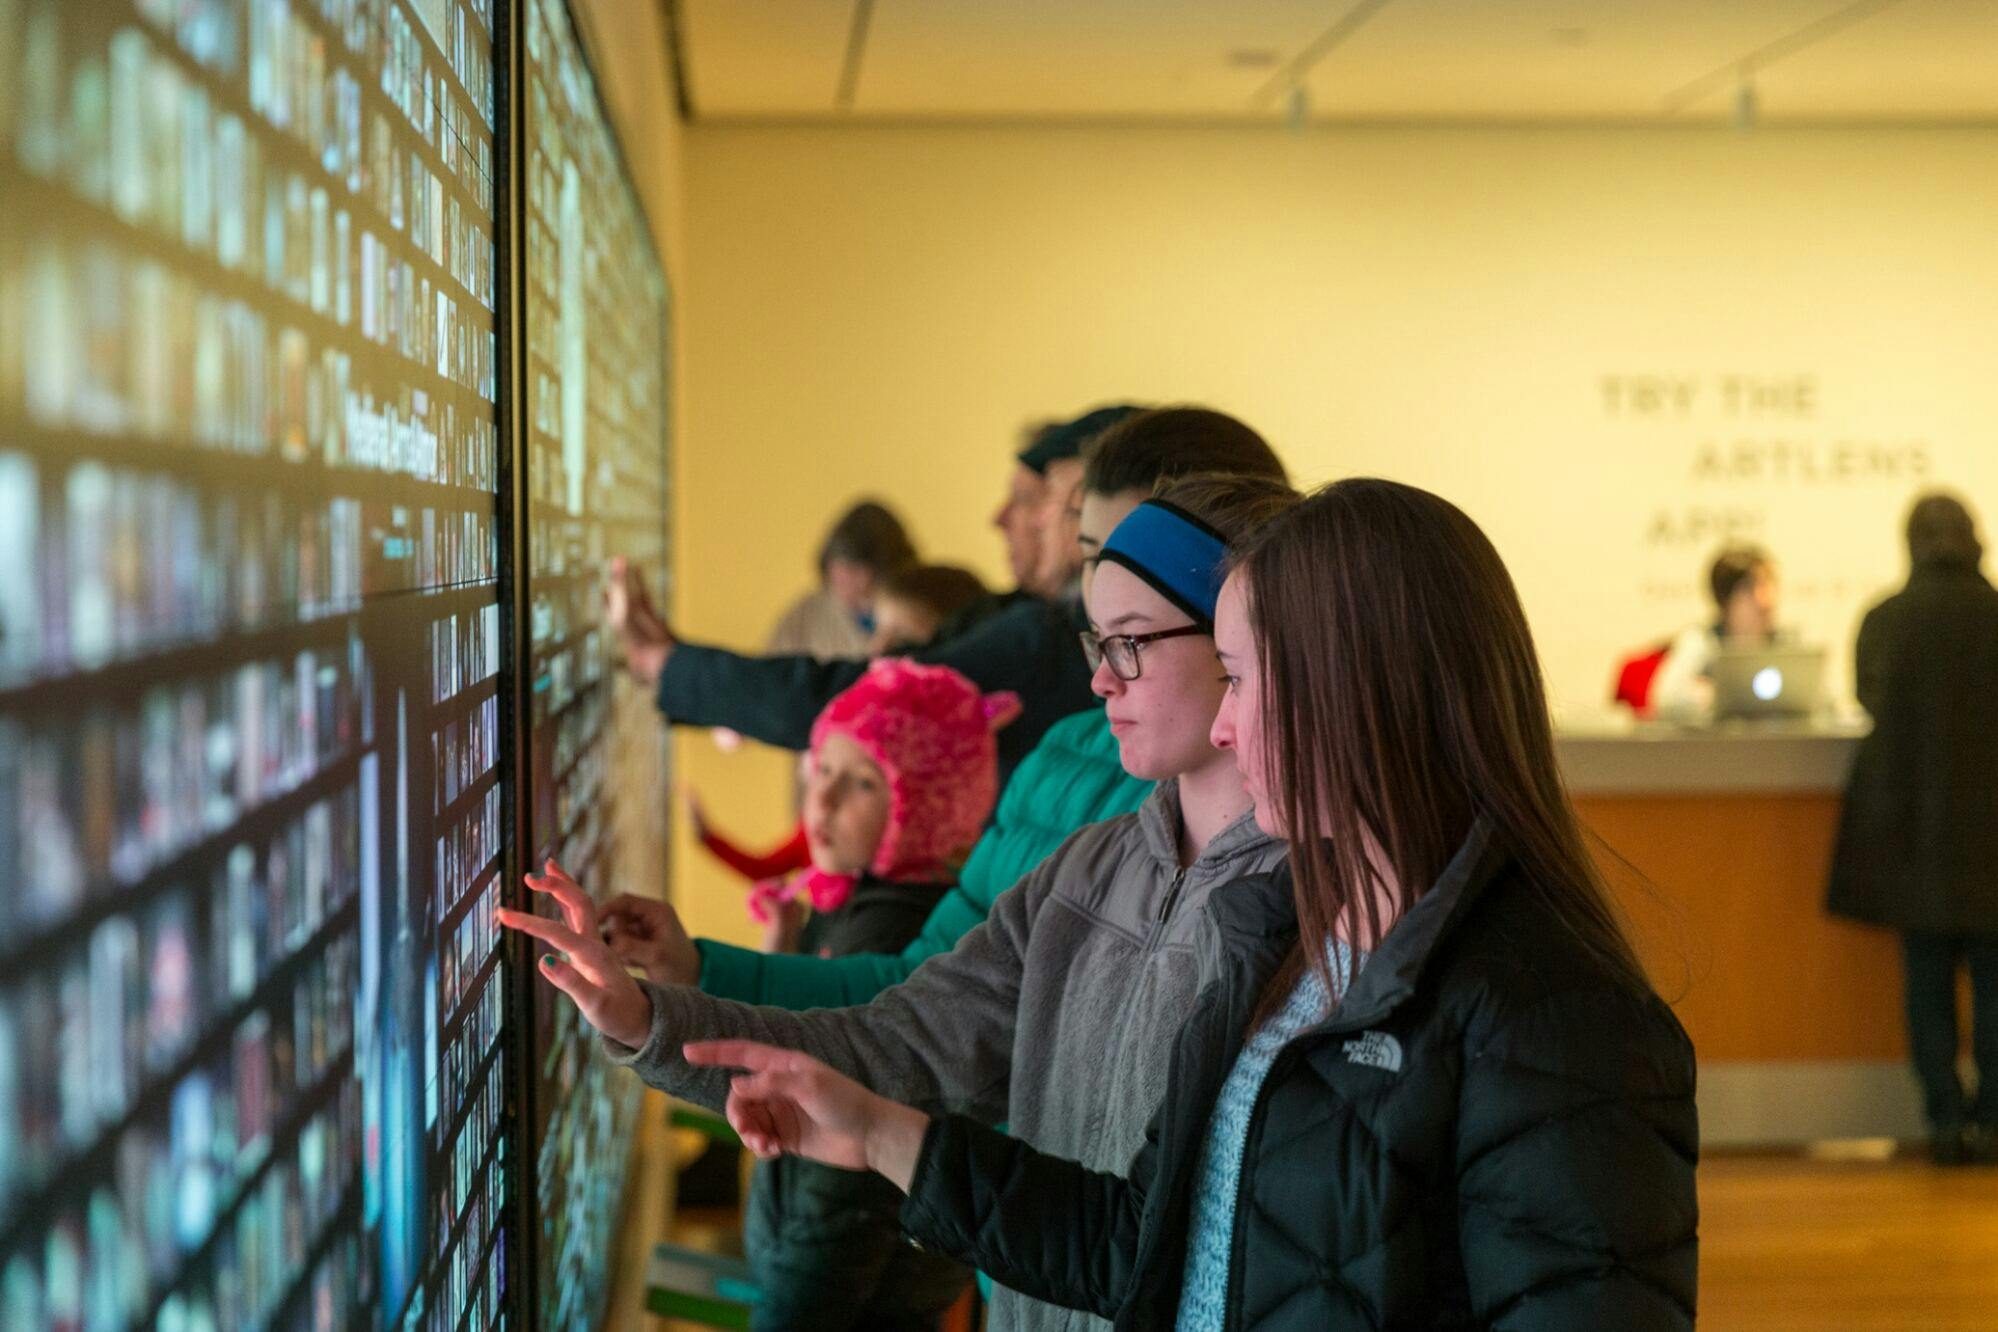 Visitors interacting with a touchscreen on the wall